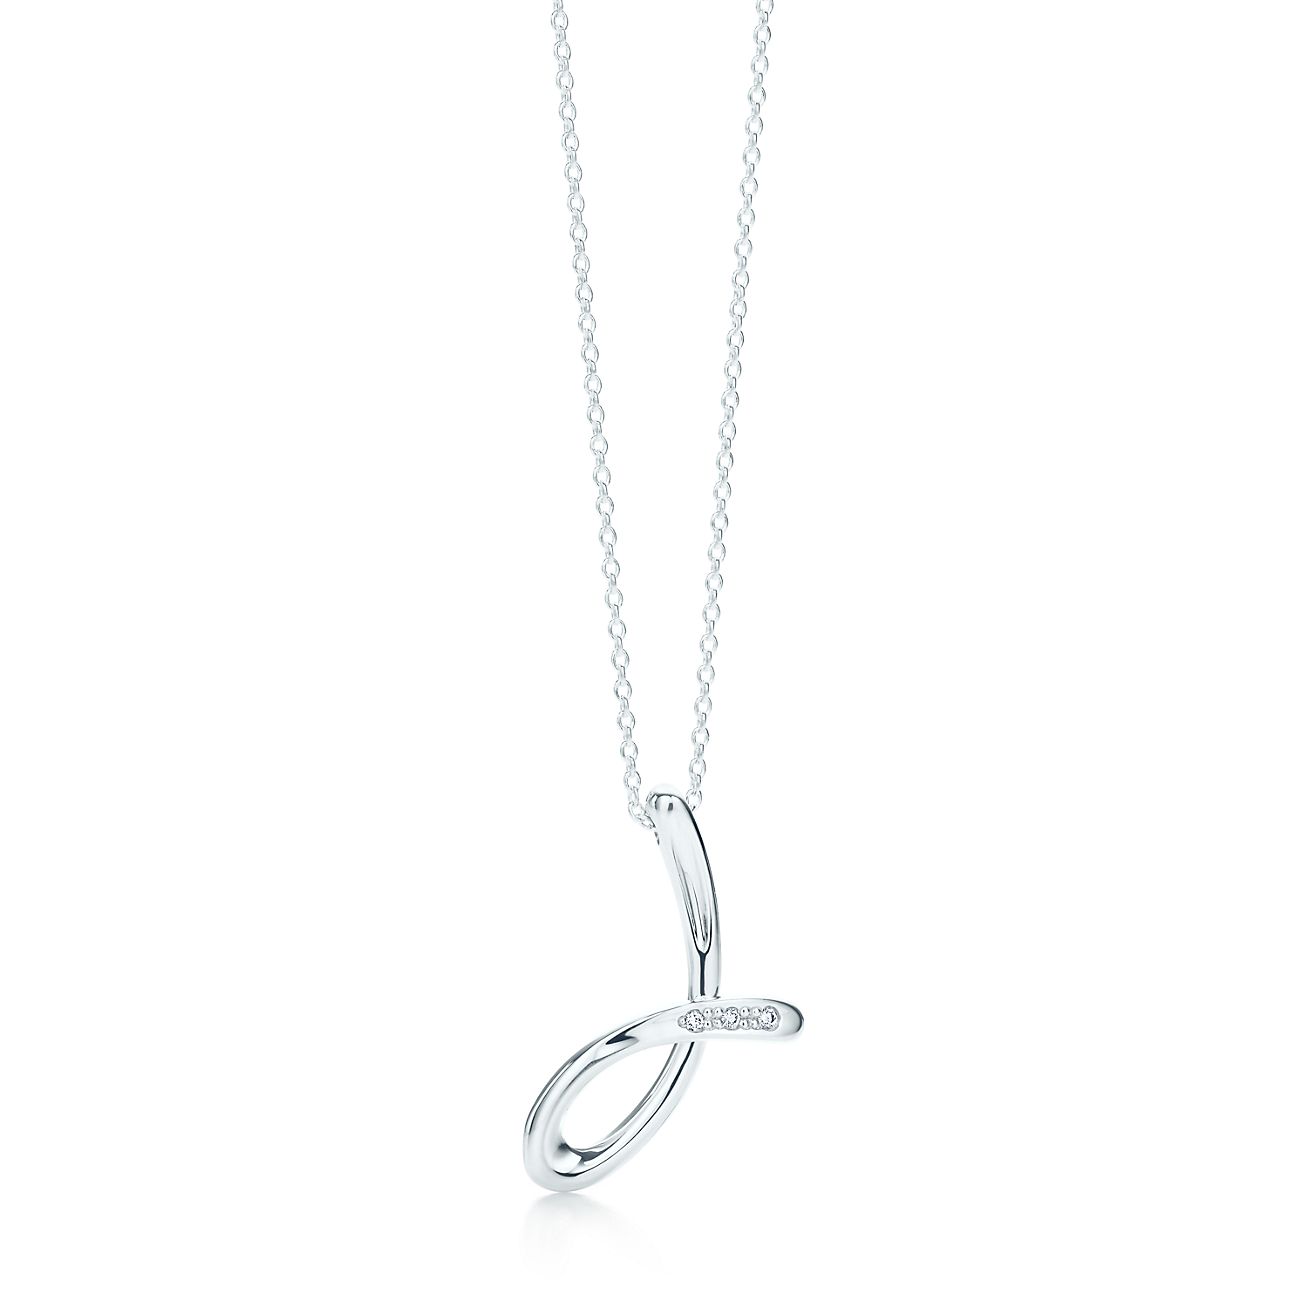 Buy Sterling Silver Cursive J Initial Necklace, J Letter Necklace, Cursive J  Initial Necklace, Silver J Letter Necklace, J Letter Necklace Online in  India - Etsy